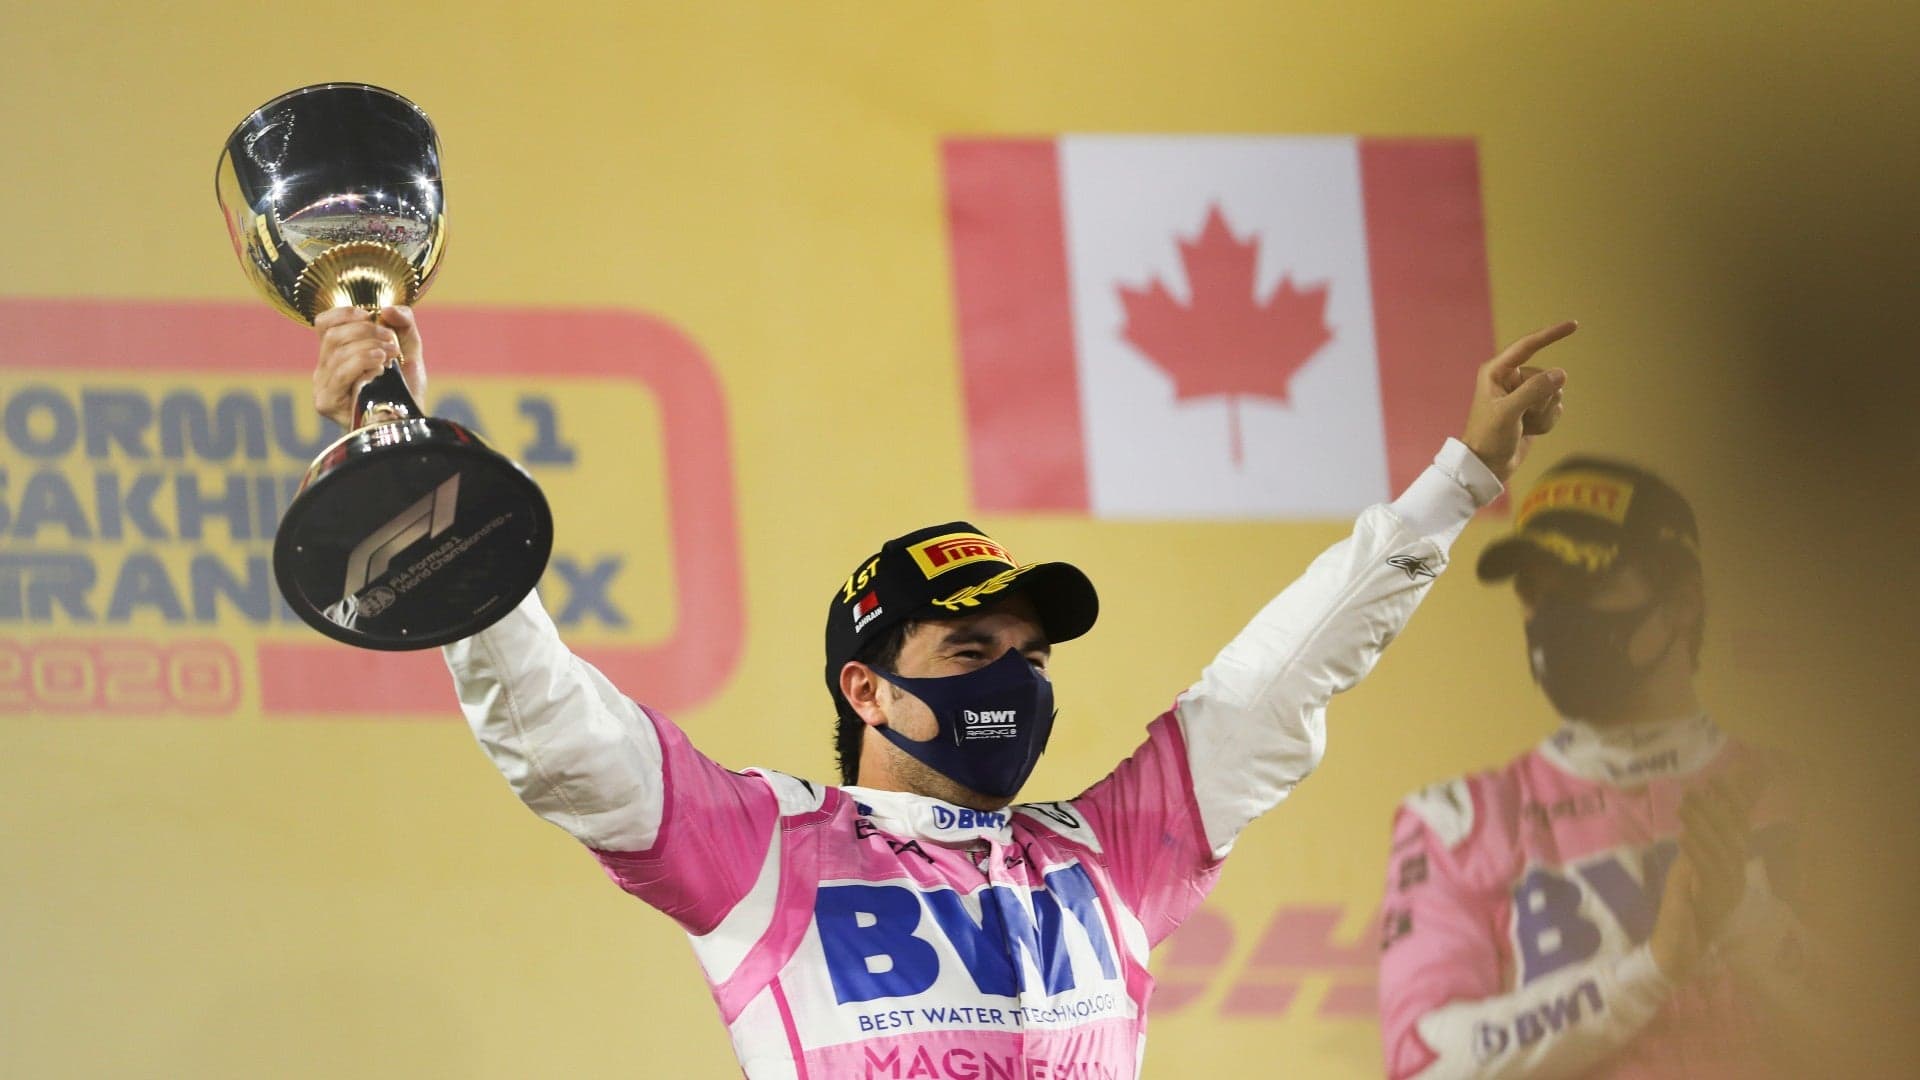 Sergio Perez Recovers From Last Place to Notch Maiden F1 Win at Sakhir Grand Prix